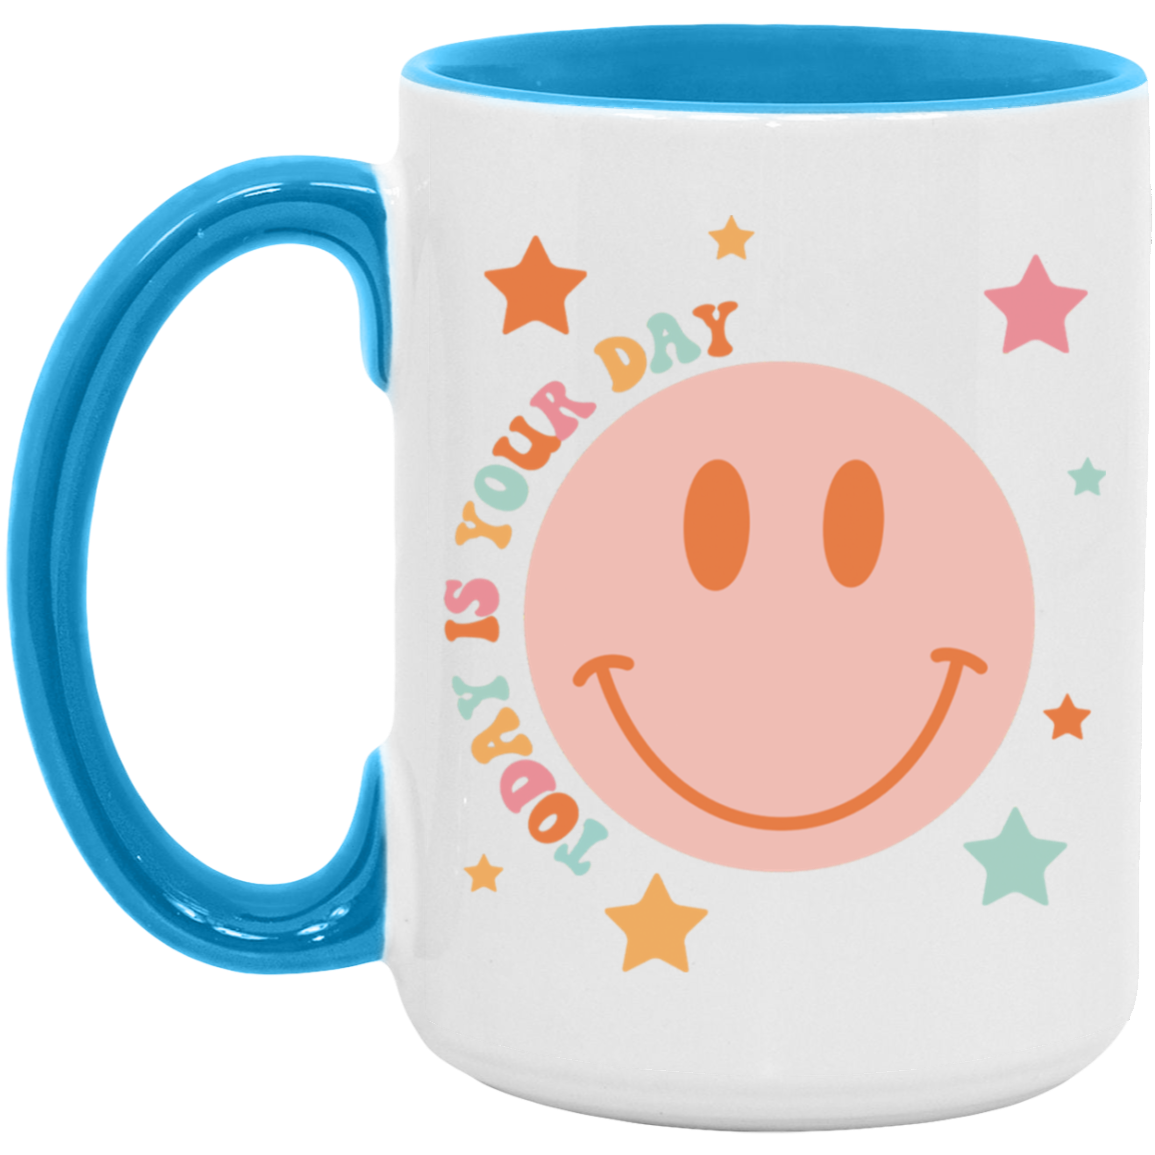 Today Is Your Day Smiley Mug